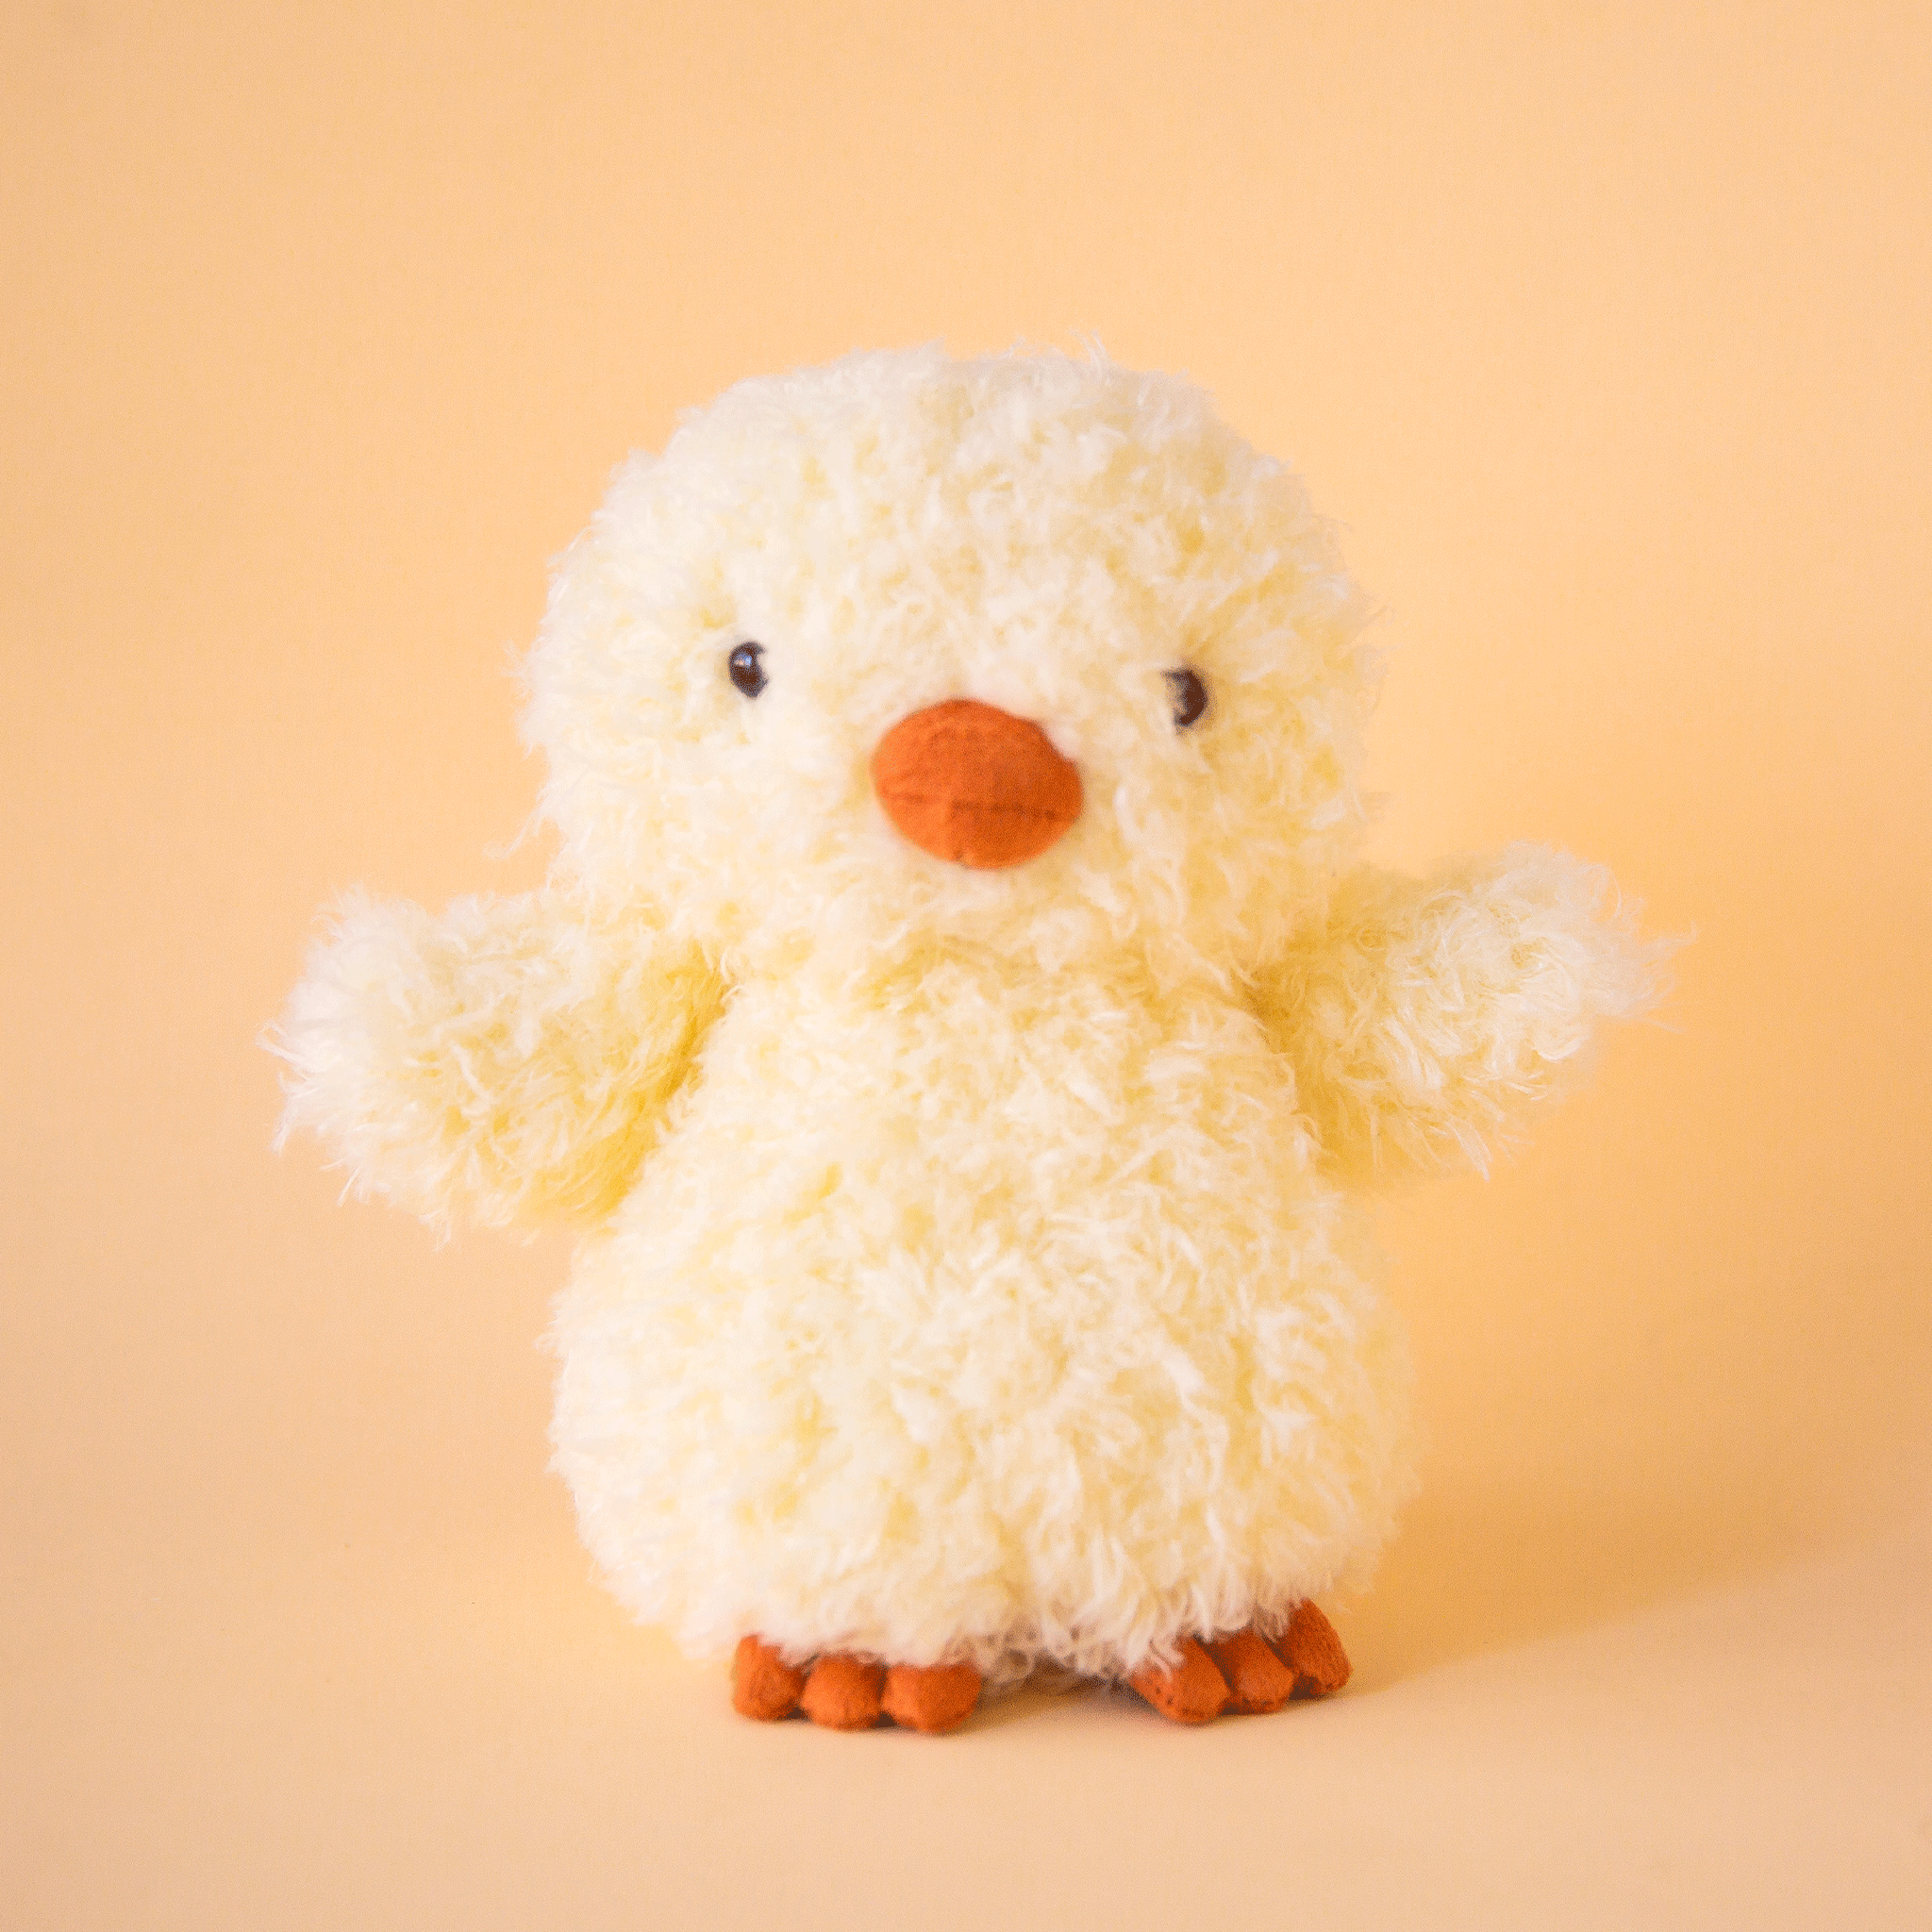 On a yellow background is a super light yellow fuzzy chick stuffed animal toy with an orange beak and feet.